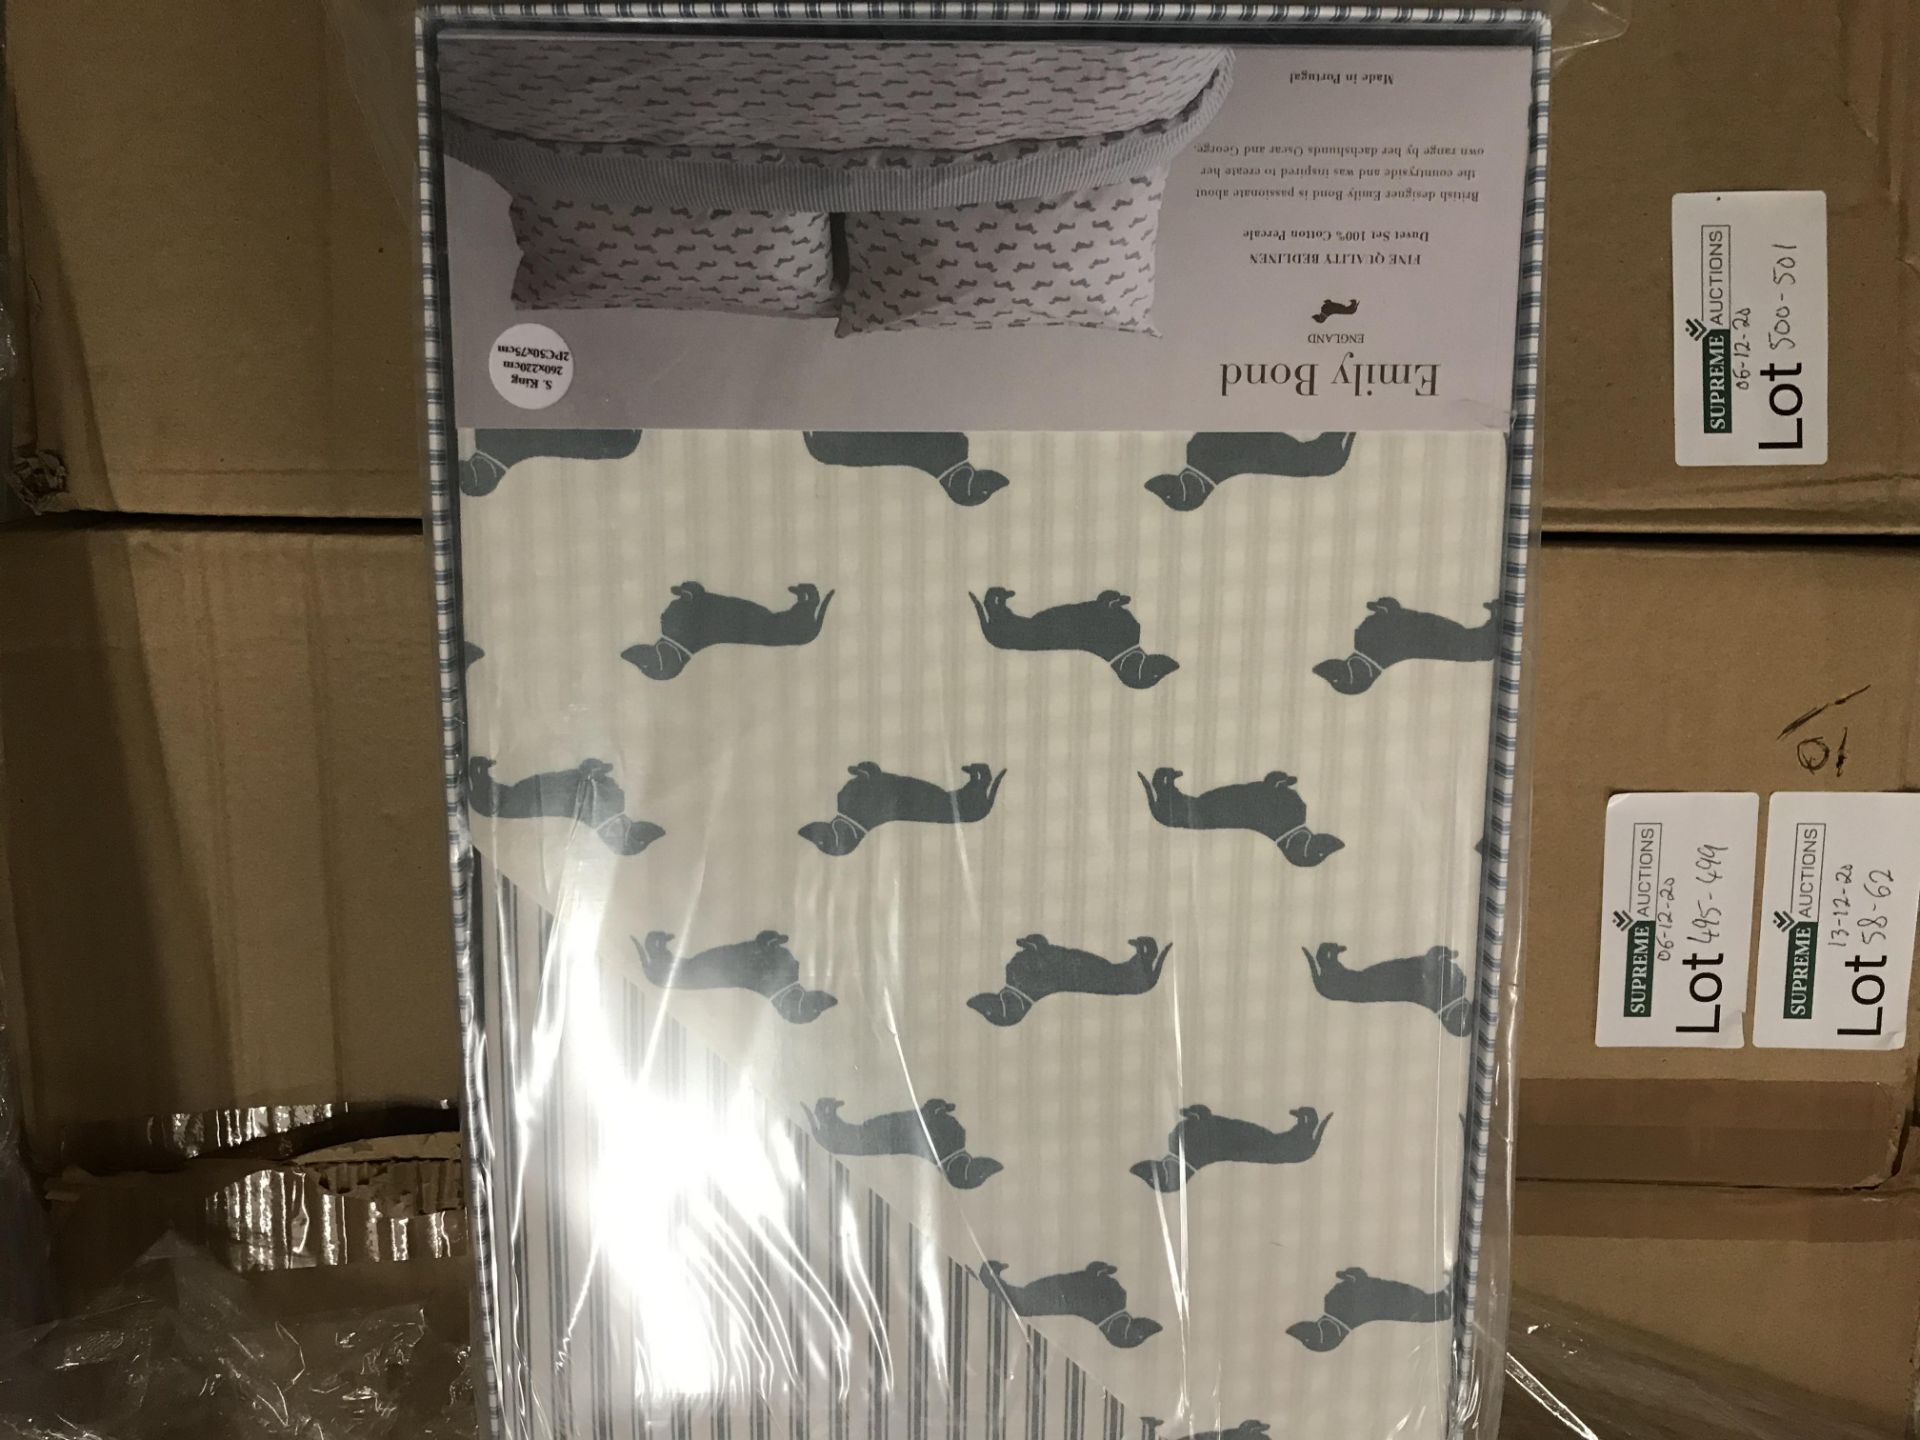 BRAND NEW EMILY BOND DOUBLE DUVET COVER SET WITH DACHSHUND DETAIL COLOUR GREY